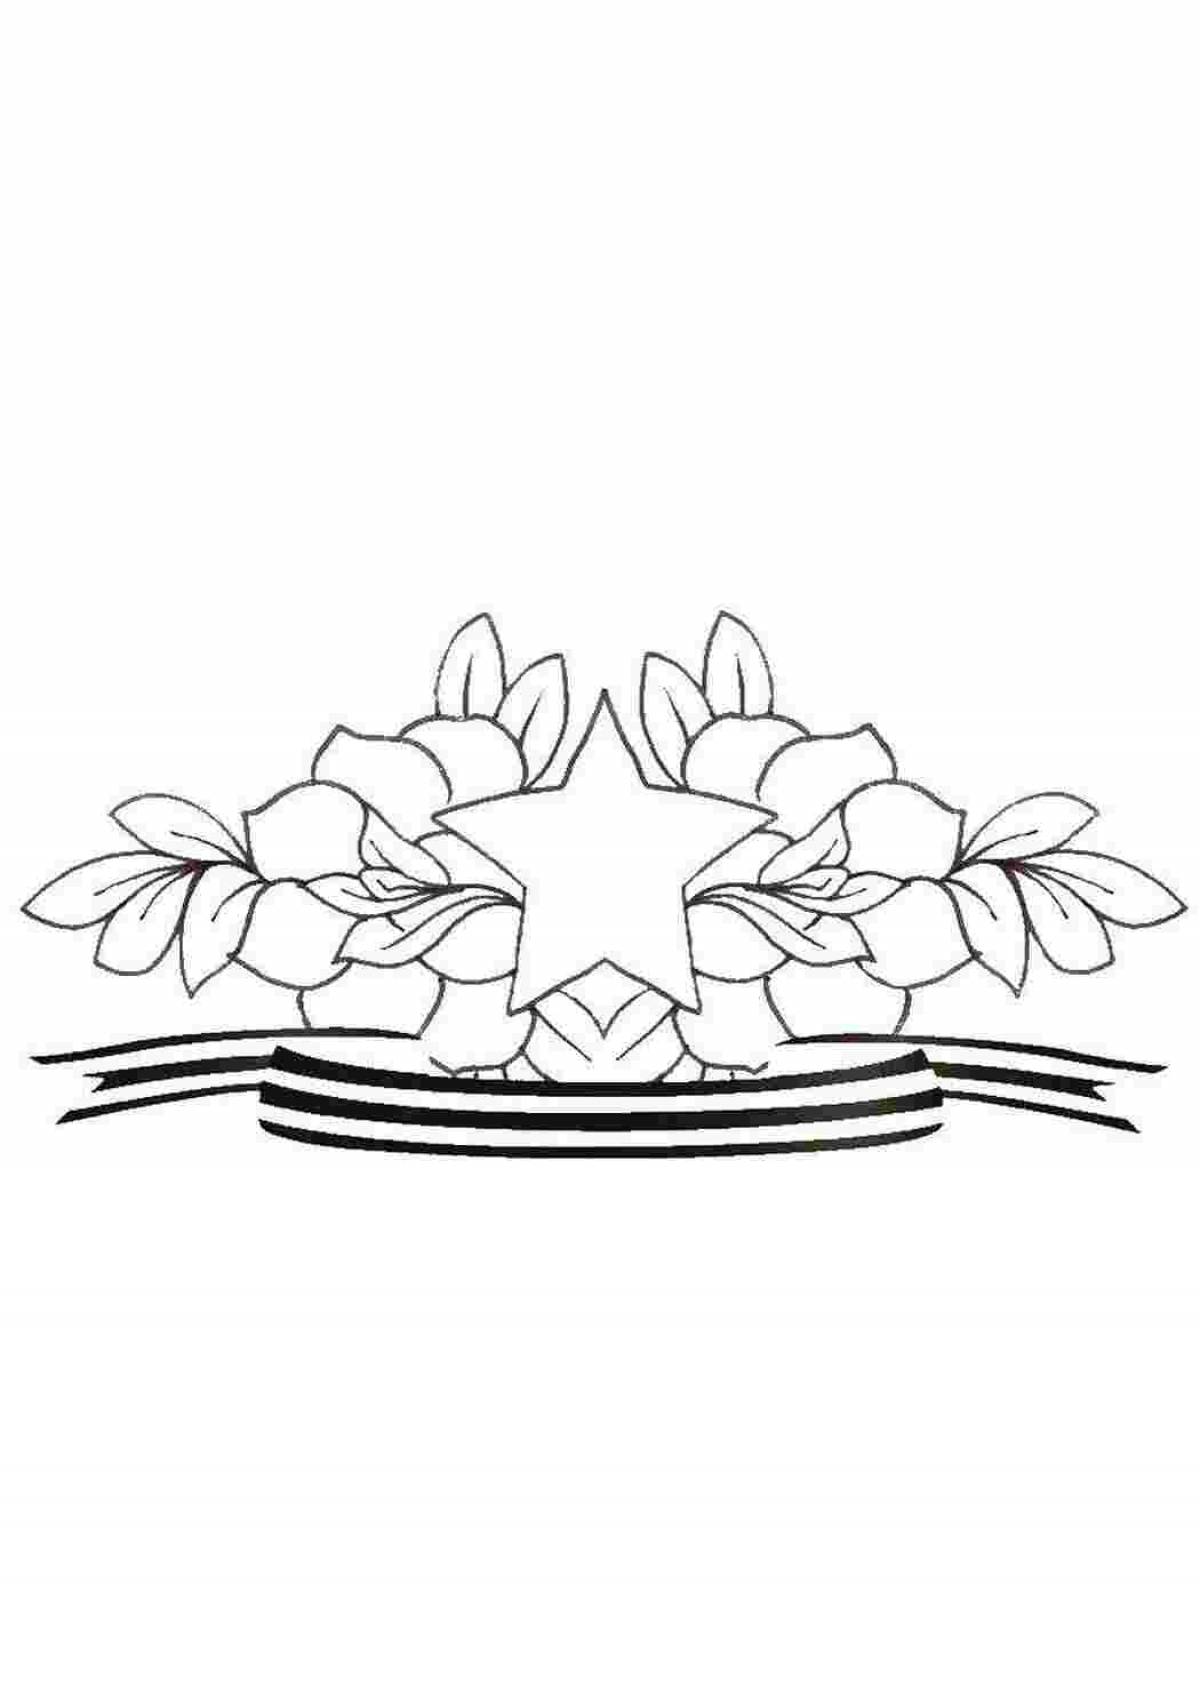 Raised star and St. George ribbon coloring page